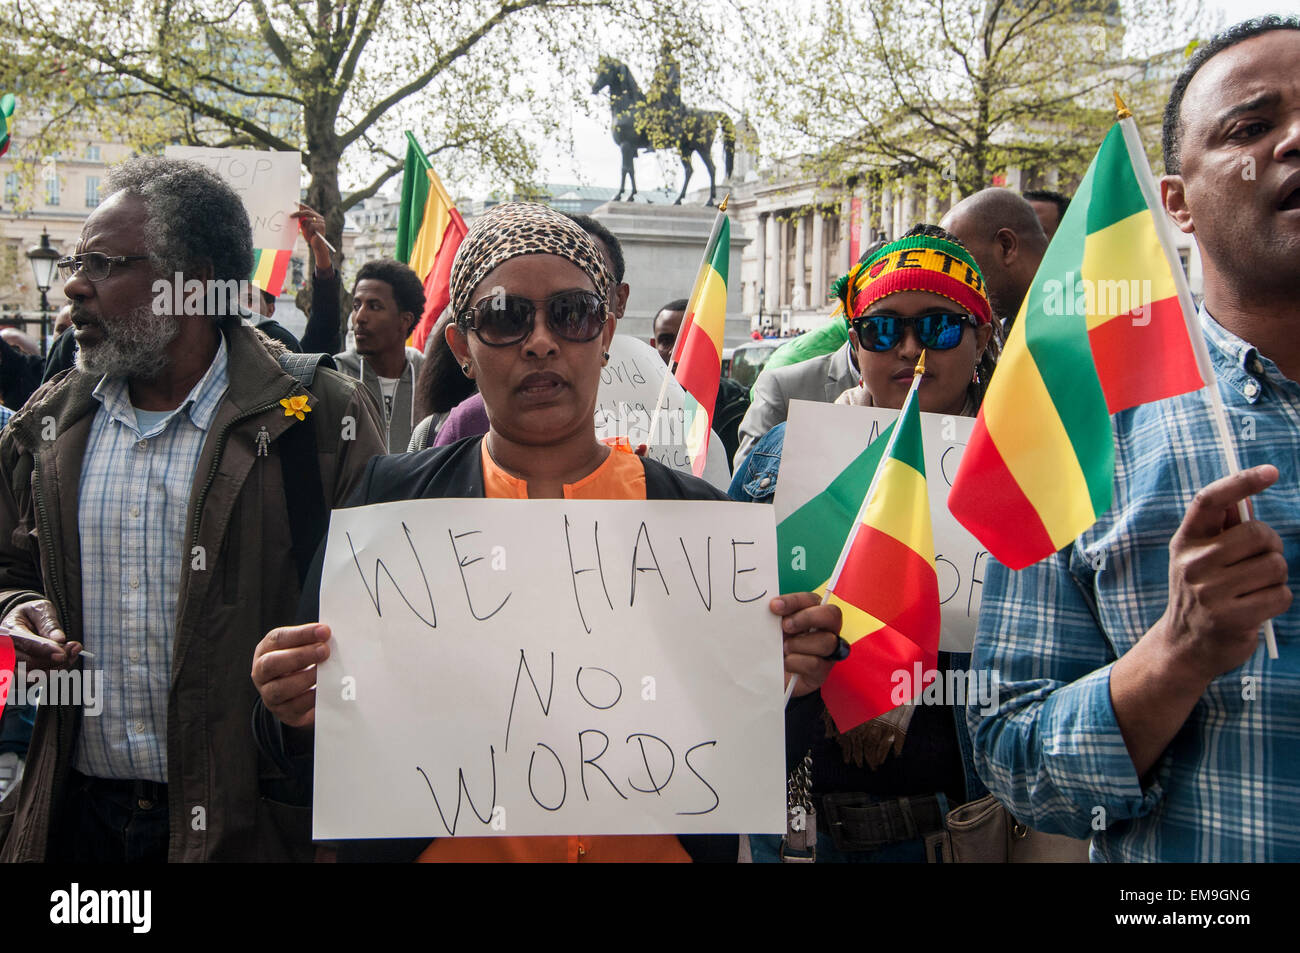 London, UK. 17 April 2015.  Ethiopians living in London gather outside the South African Embassy in Trafalgar Square to protest against the xenophobic violence taking place in South Africa.  According to the protestors, Zulu people have said that foreigners, including Ethiopians, should pack up and leave South Africa. Credit:  Stephen Chung / Alamy Live News Stock Photo